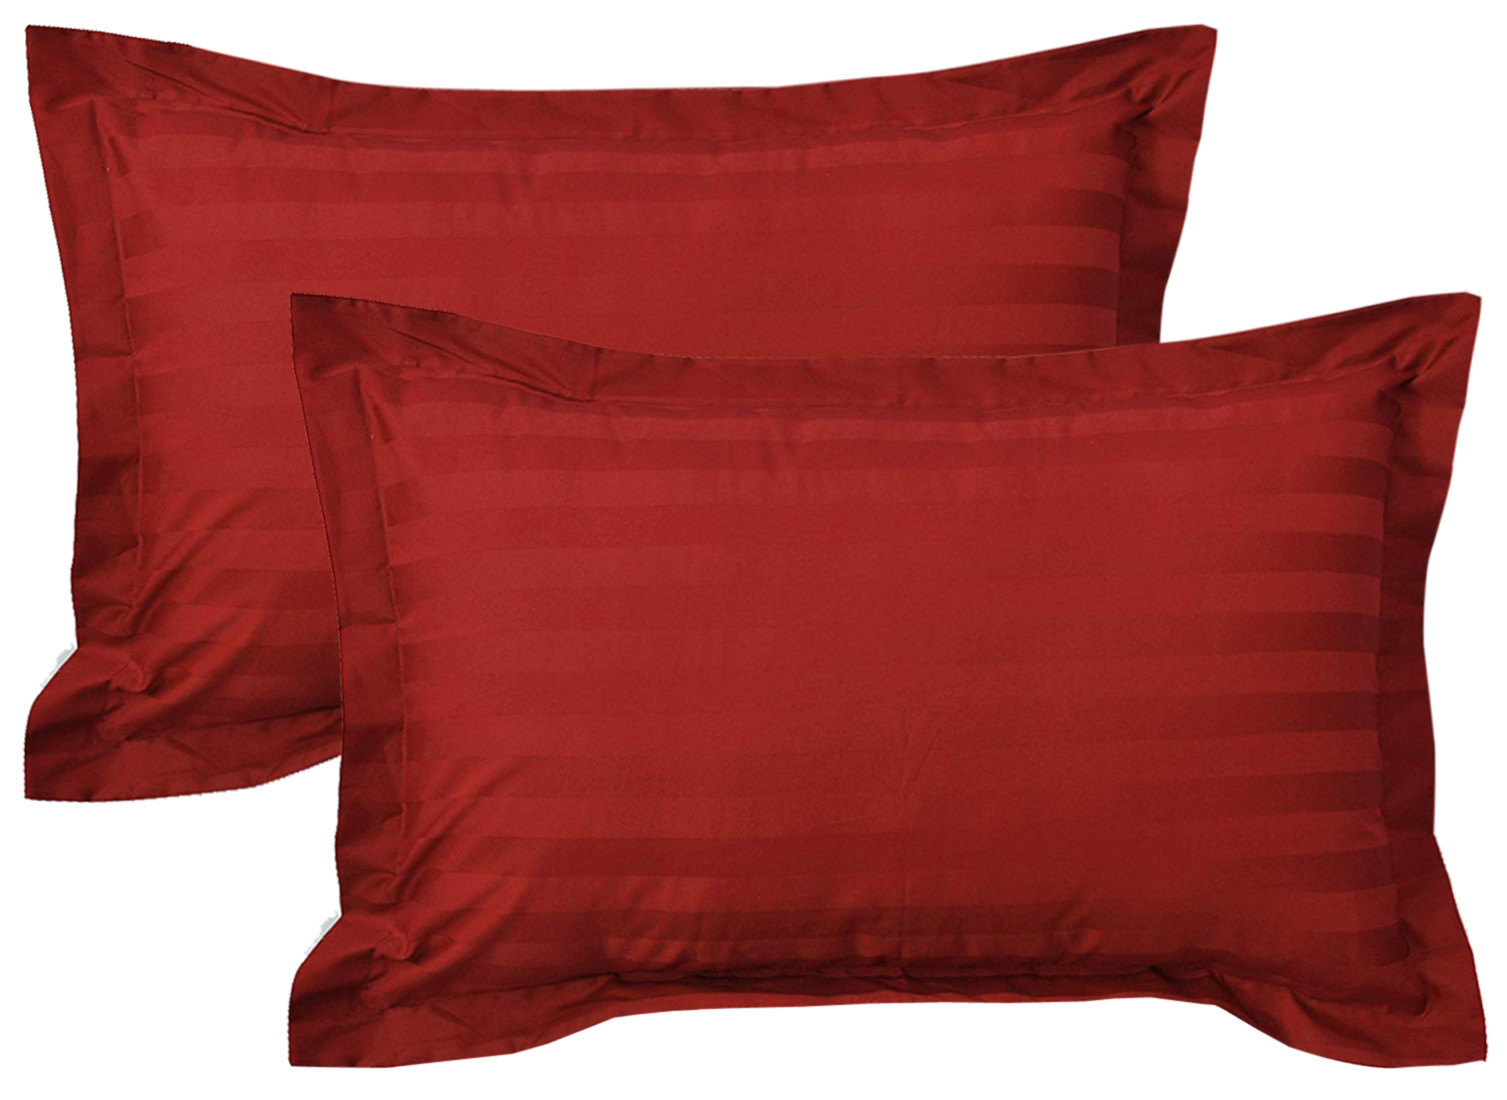 Kuber Industries Lining Design Breathable & Soft Cotton Pillow Cover/Protector/Case- 18x28 Inch,(Red)-HS43KUBMART26785